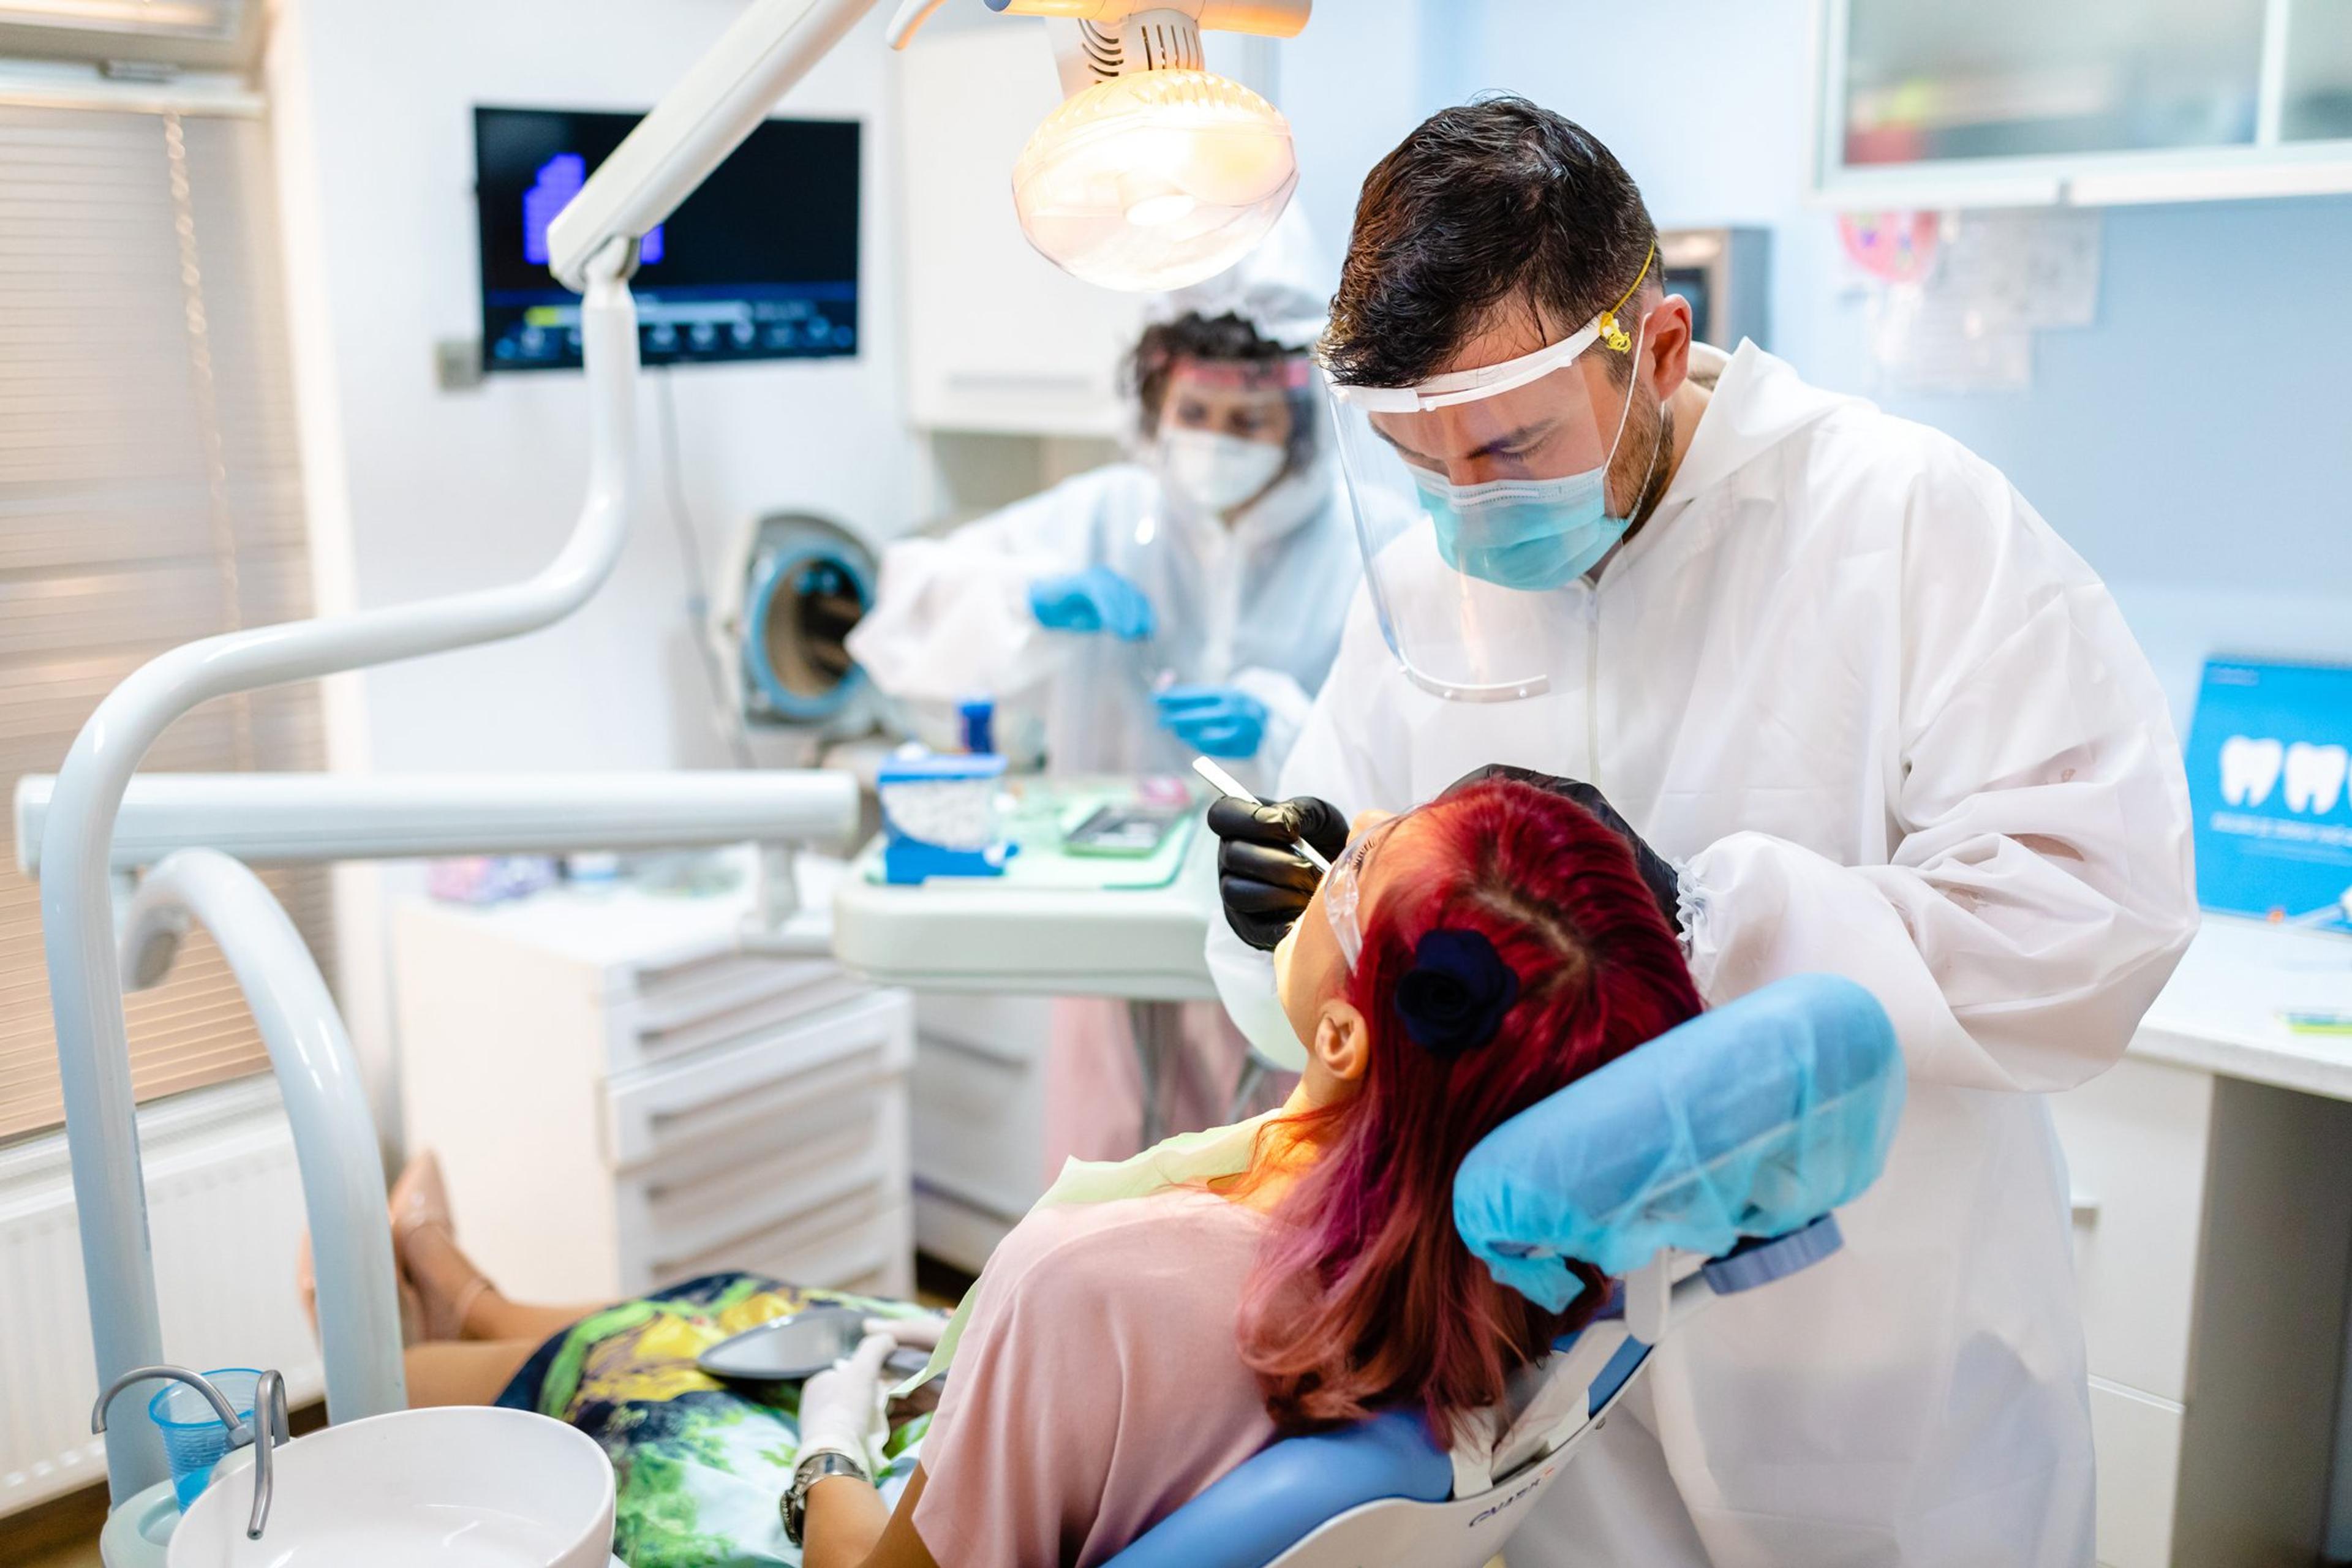 Dentist wearing PPE helps female patient